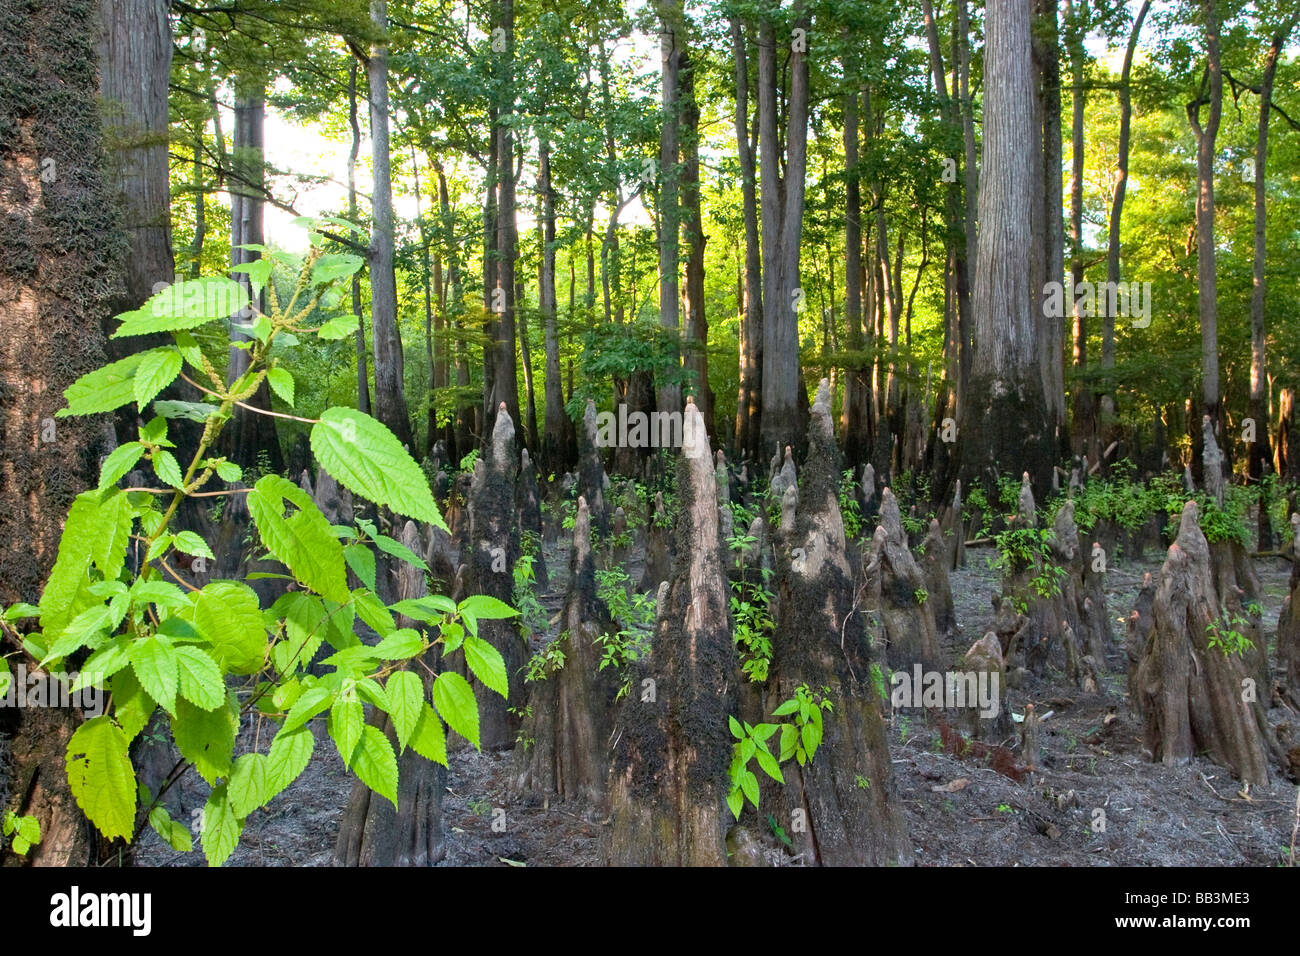 Cypress swamp along the White River in Arkansas. Part of the White River National Wildlife Refuge. Stock Photo